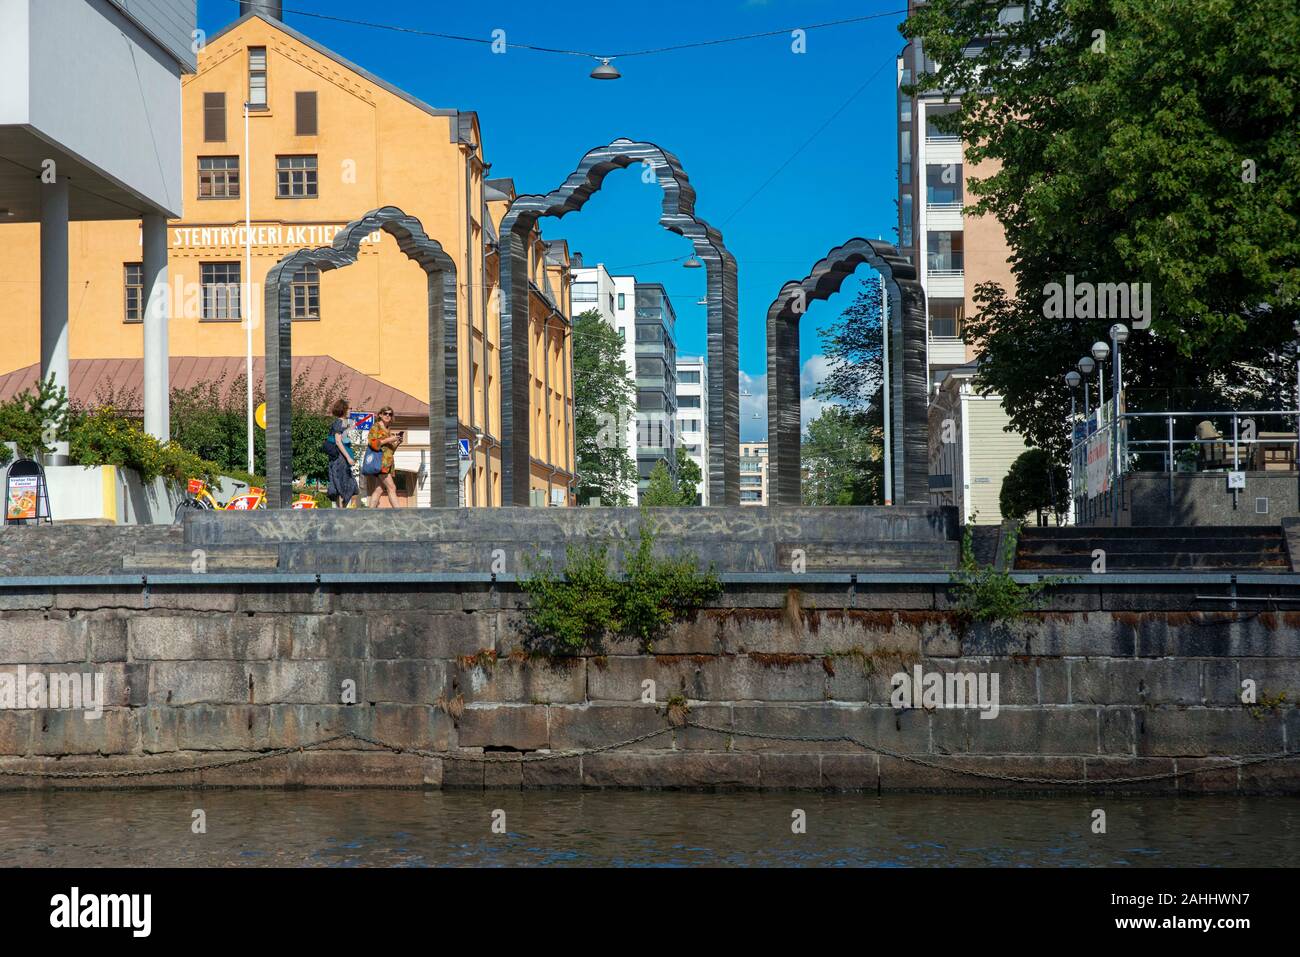 Promenade on the banks of the River Aura in Turku Finland. Stock Photo